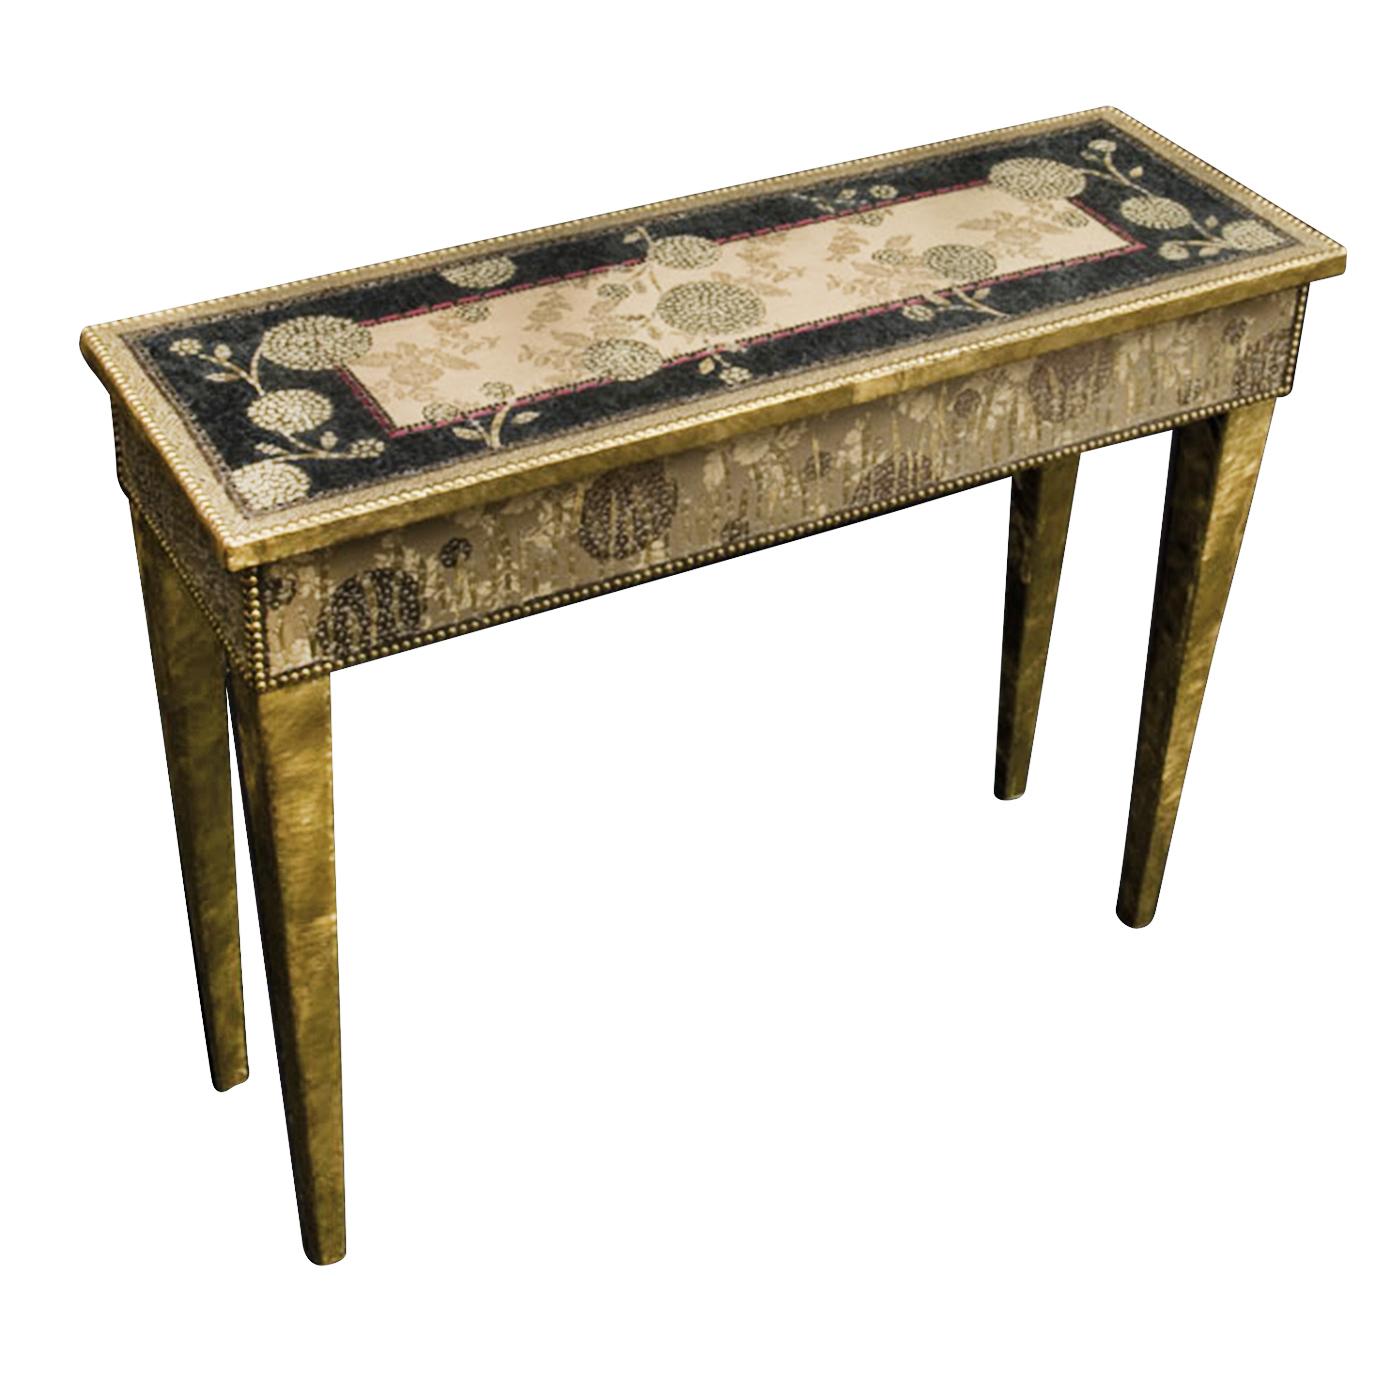 This magnificent console table is made in brass and fiberglass and is hand-decorated with sequins in whimsical patterns that are accented with studs and nails.